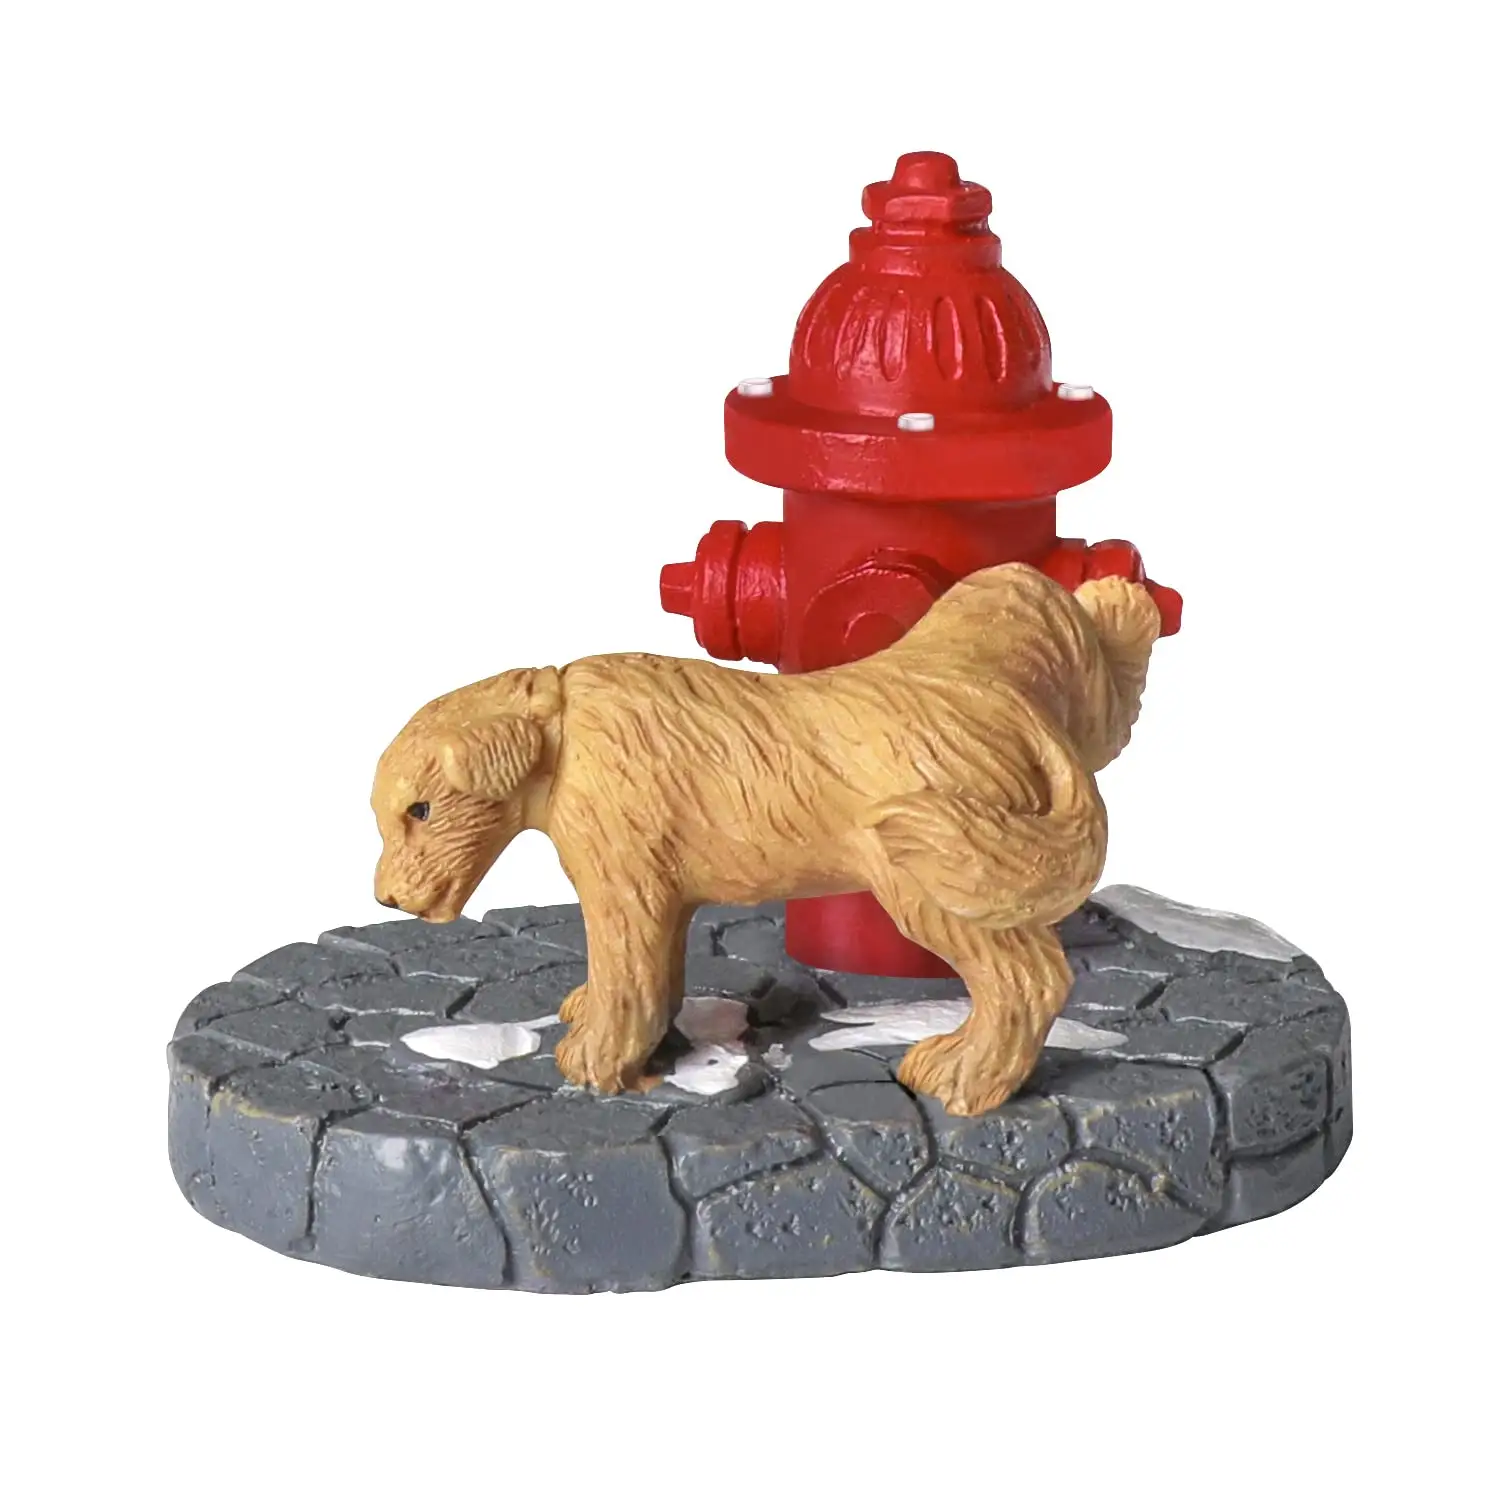 Christmas Village Accessories Resin Puppy Collection Christmas Home Decor Cute Puppy Figurine Village Set for Christmas Vacation